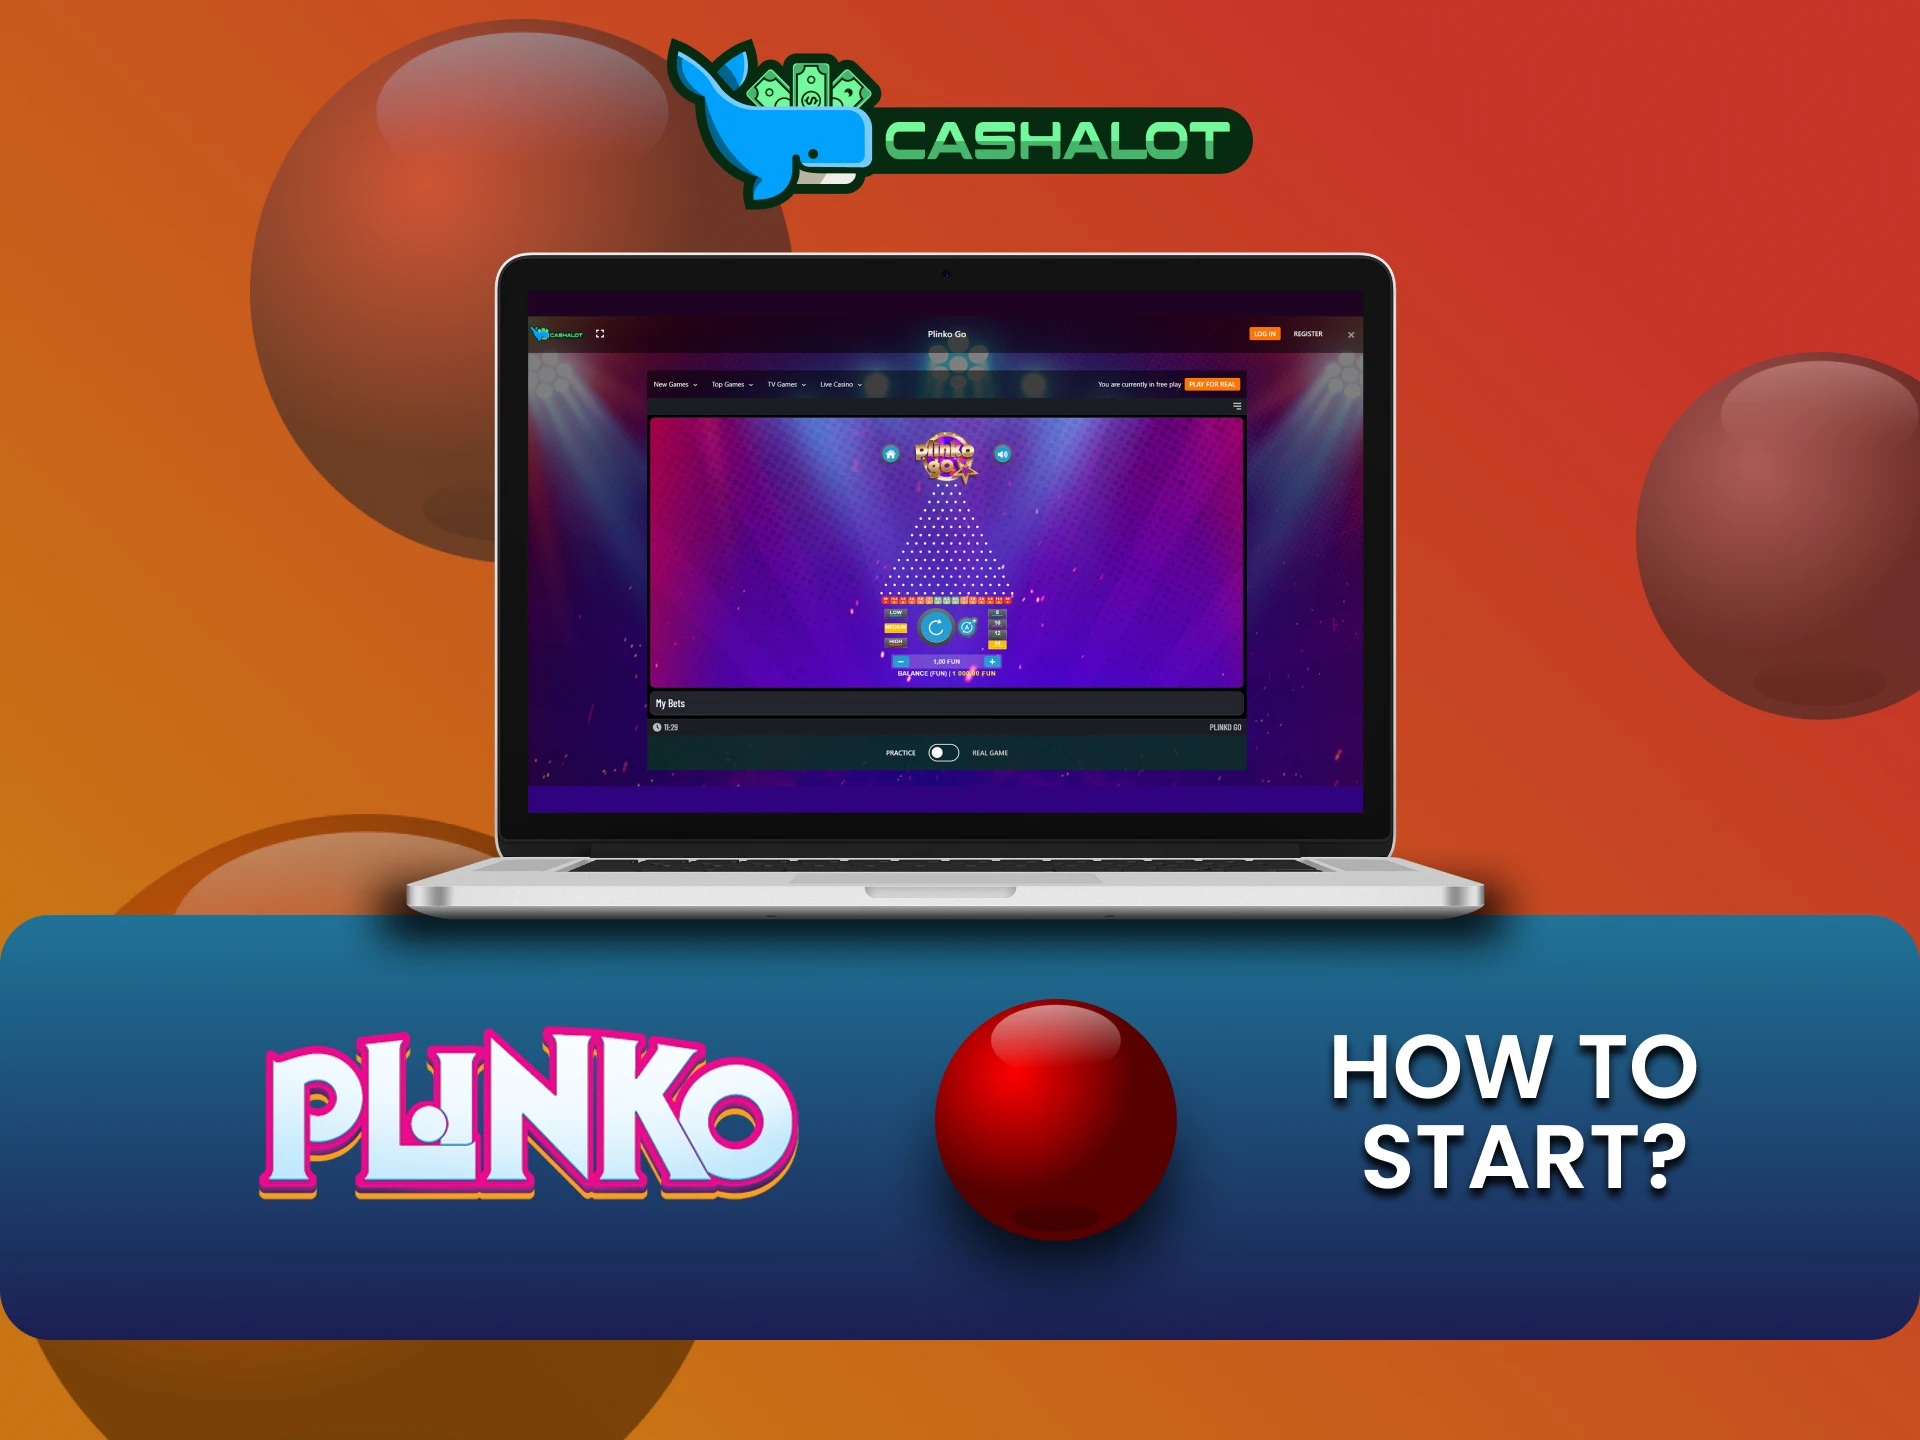 Go to the games section on Cashalot to play Plinko.